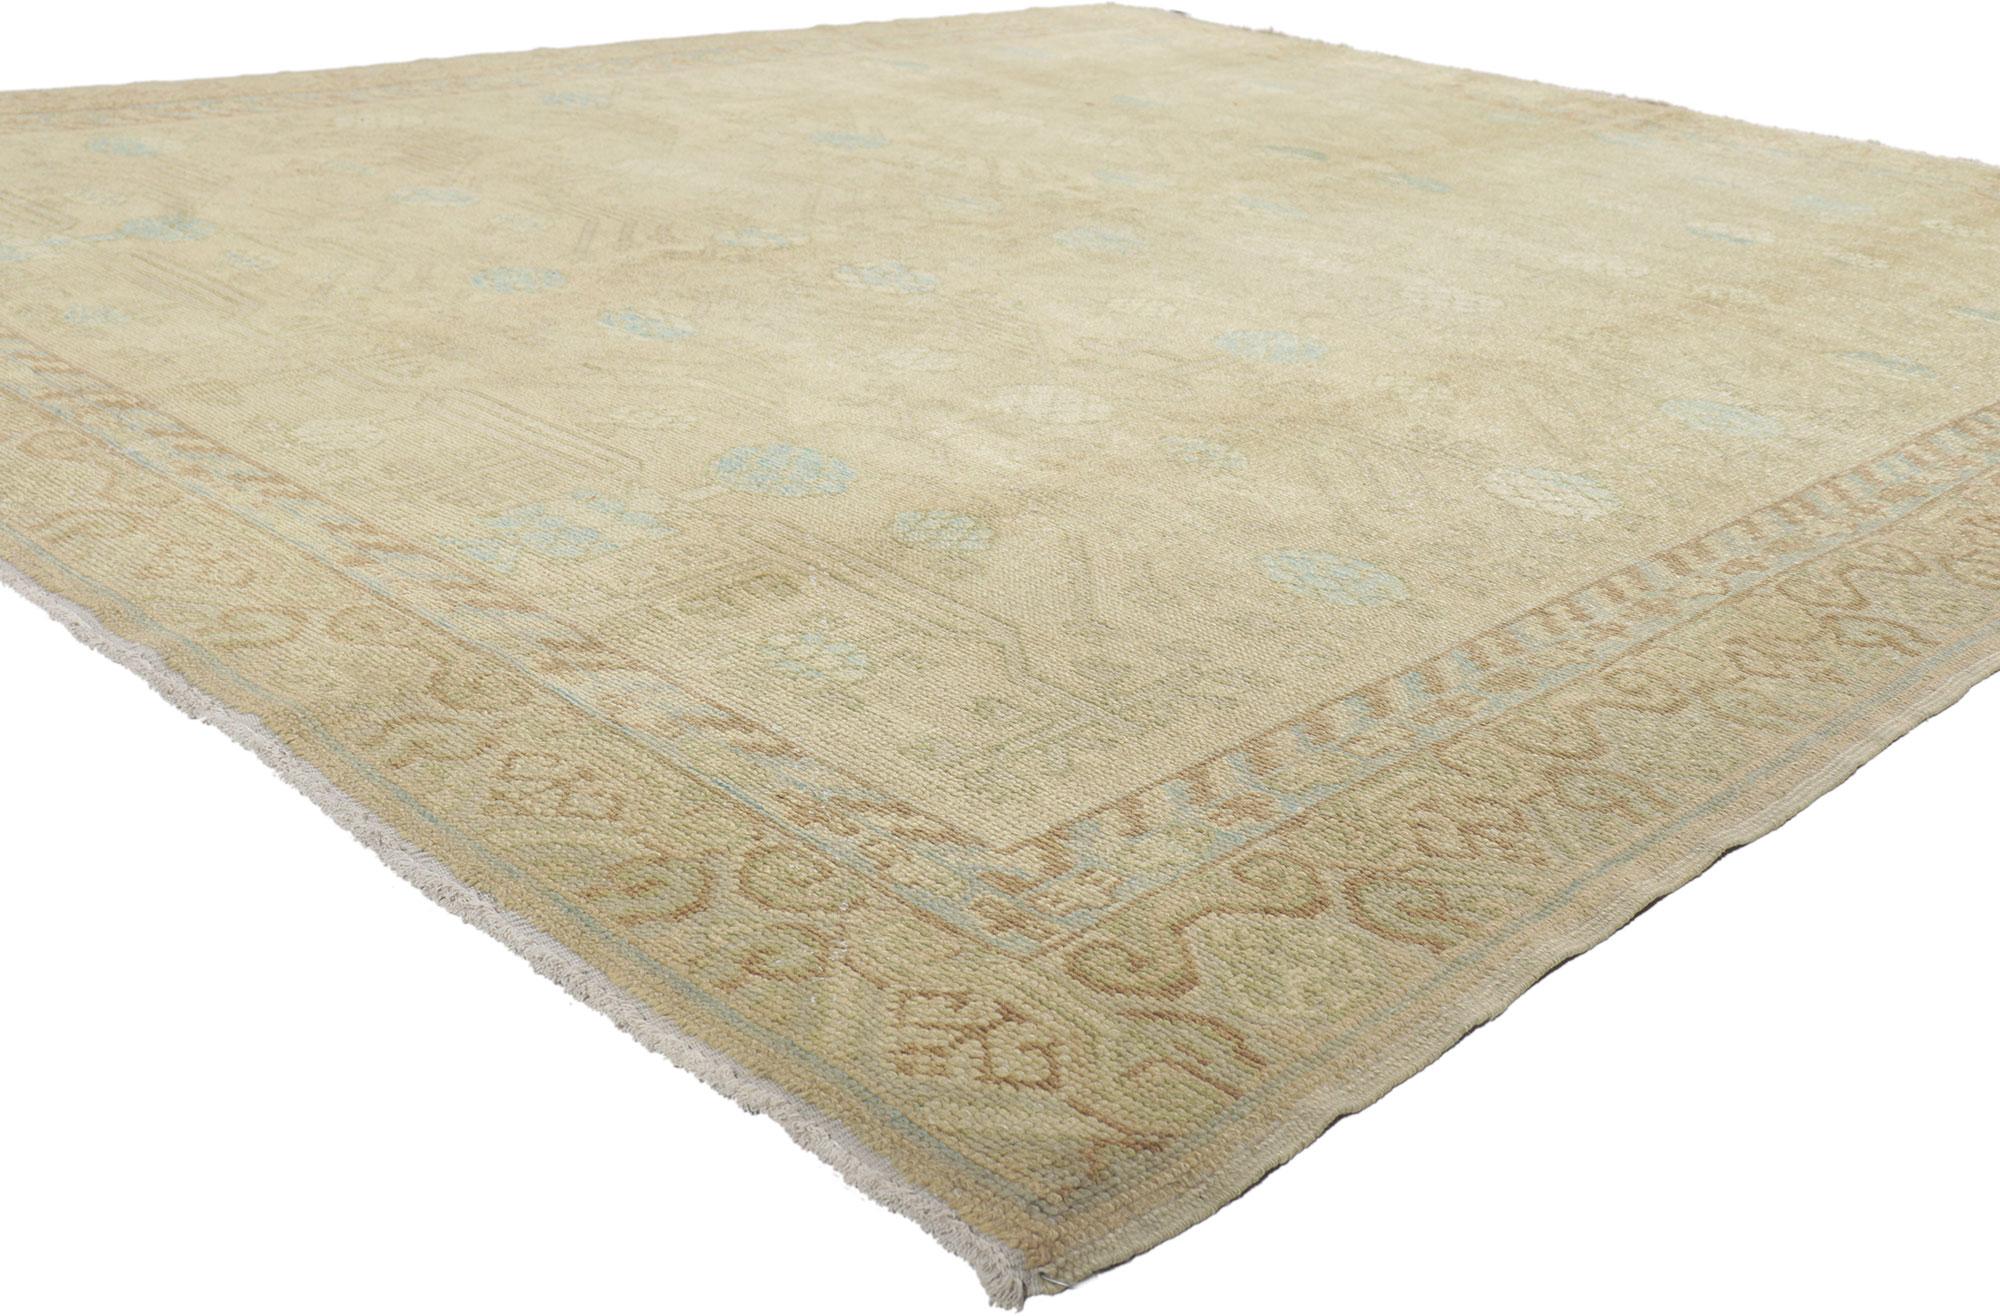 51624 New Soft Earth-Tone Turkish Khotan Rug, 08'06 x 09'07. 
Emanating timeless style with incredible detail and texture, this hand knotted wool Turkish Khotan rug is a captivating vision of woven beauty. The allover pomegranate pattern and soft